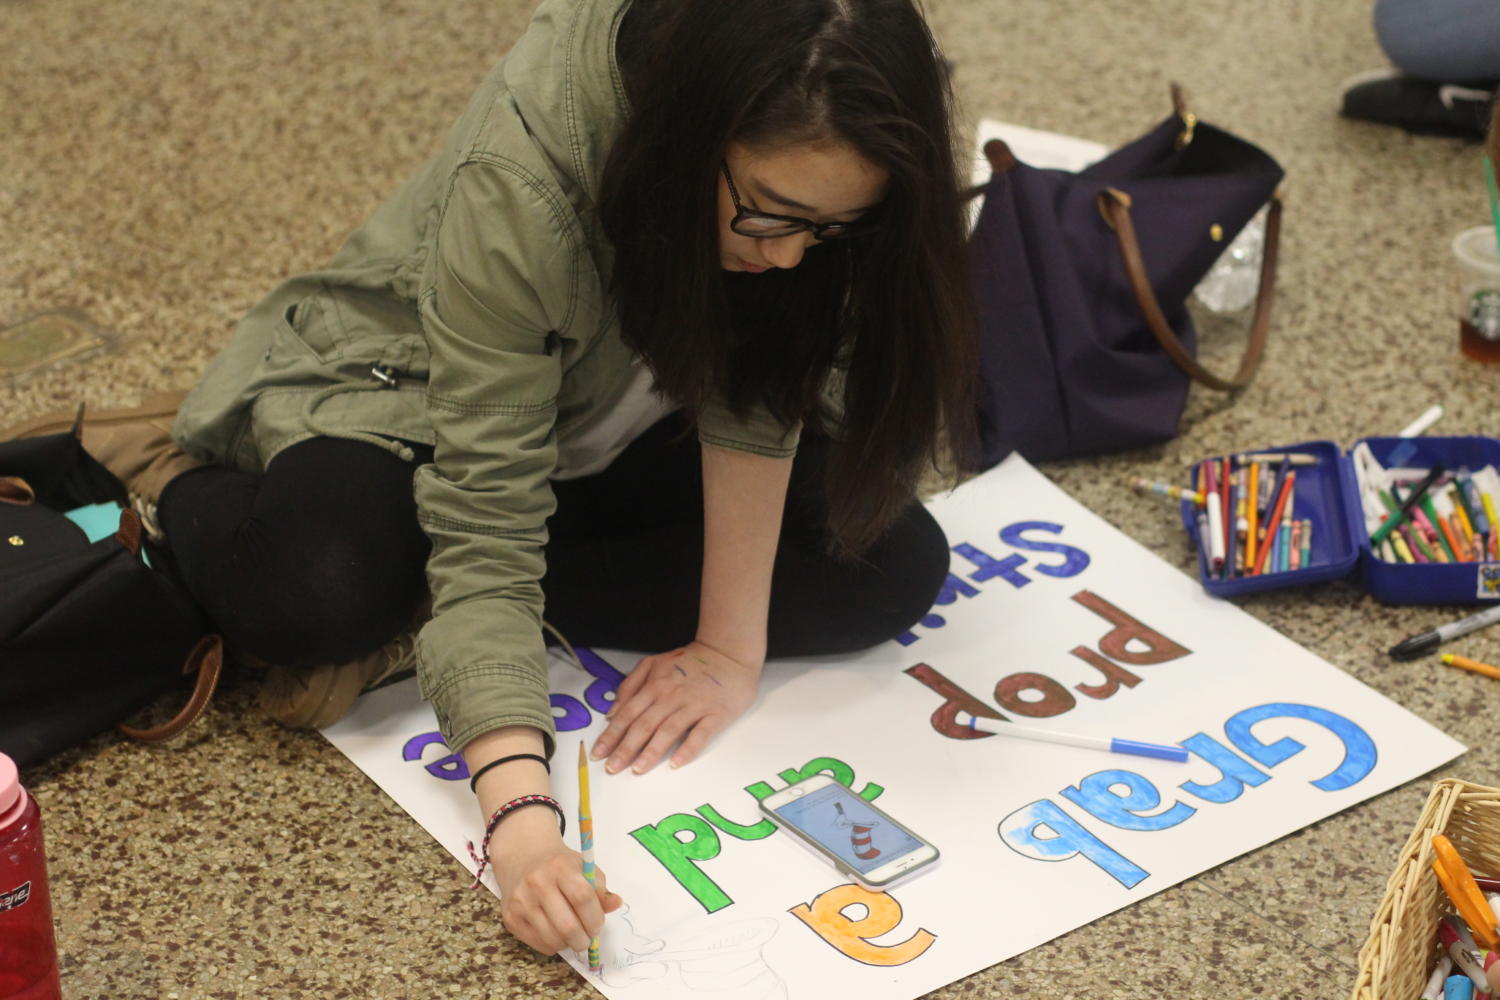 Relay+for+Life+Committee+members+prepare+posters+for+fundraising+efforts.